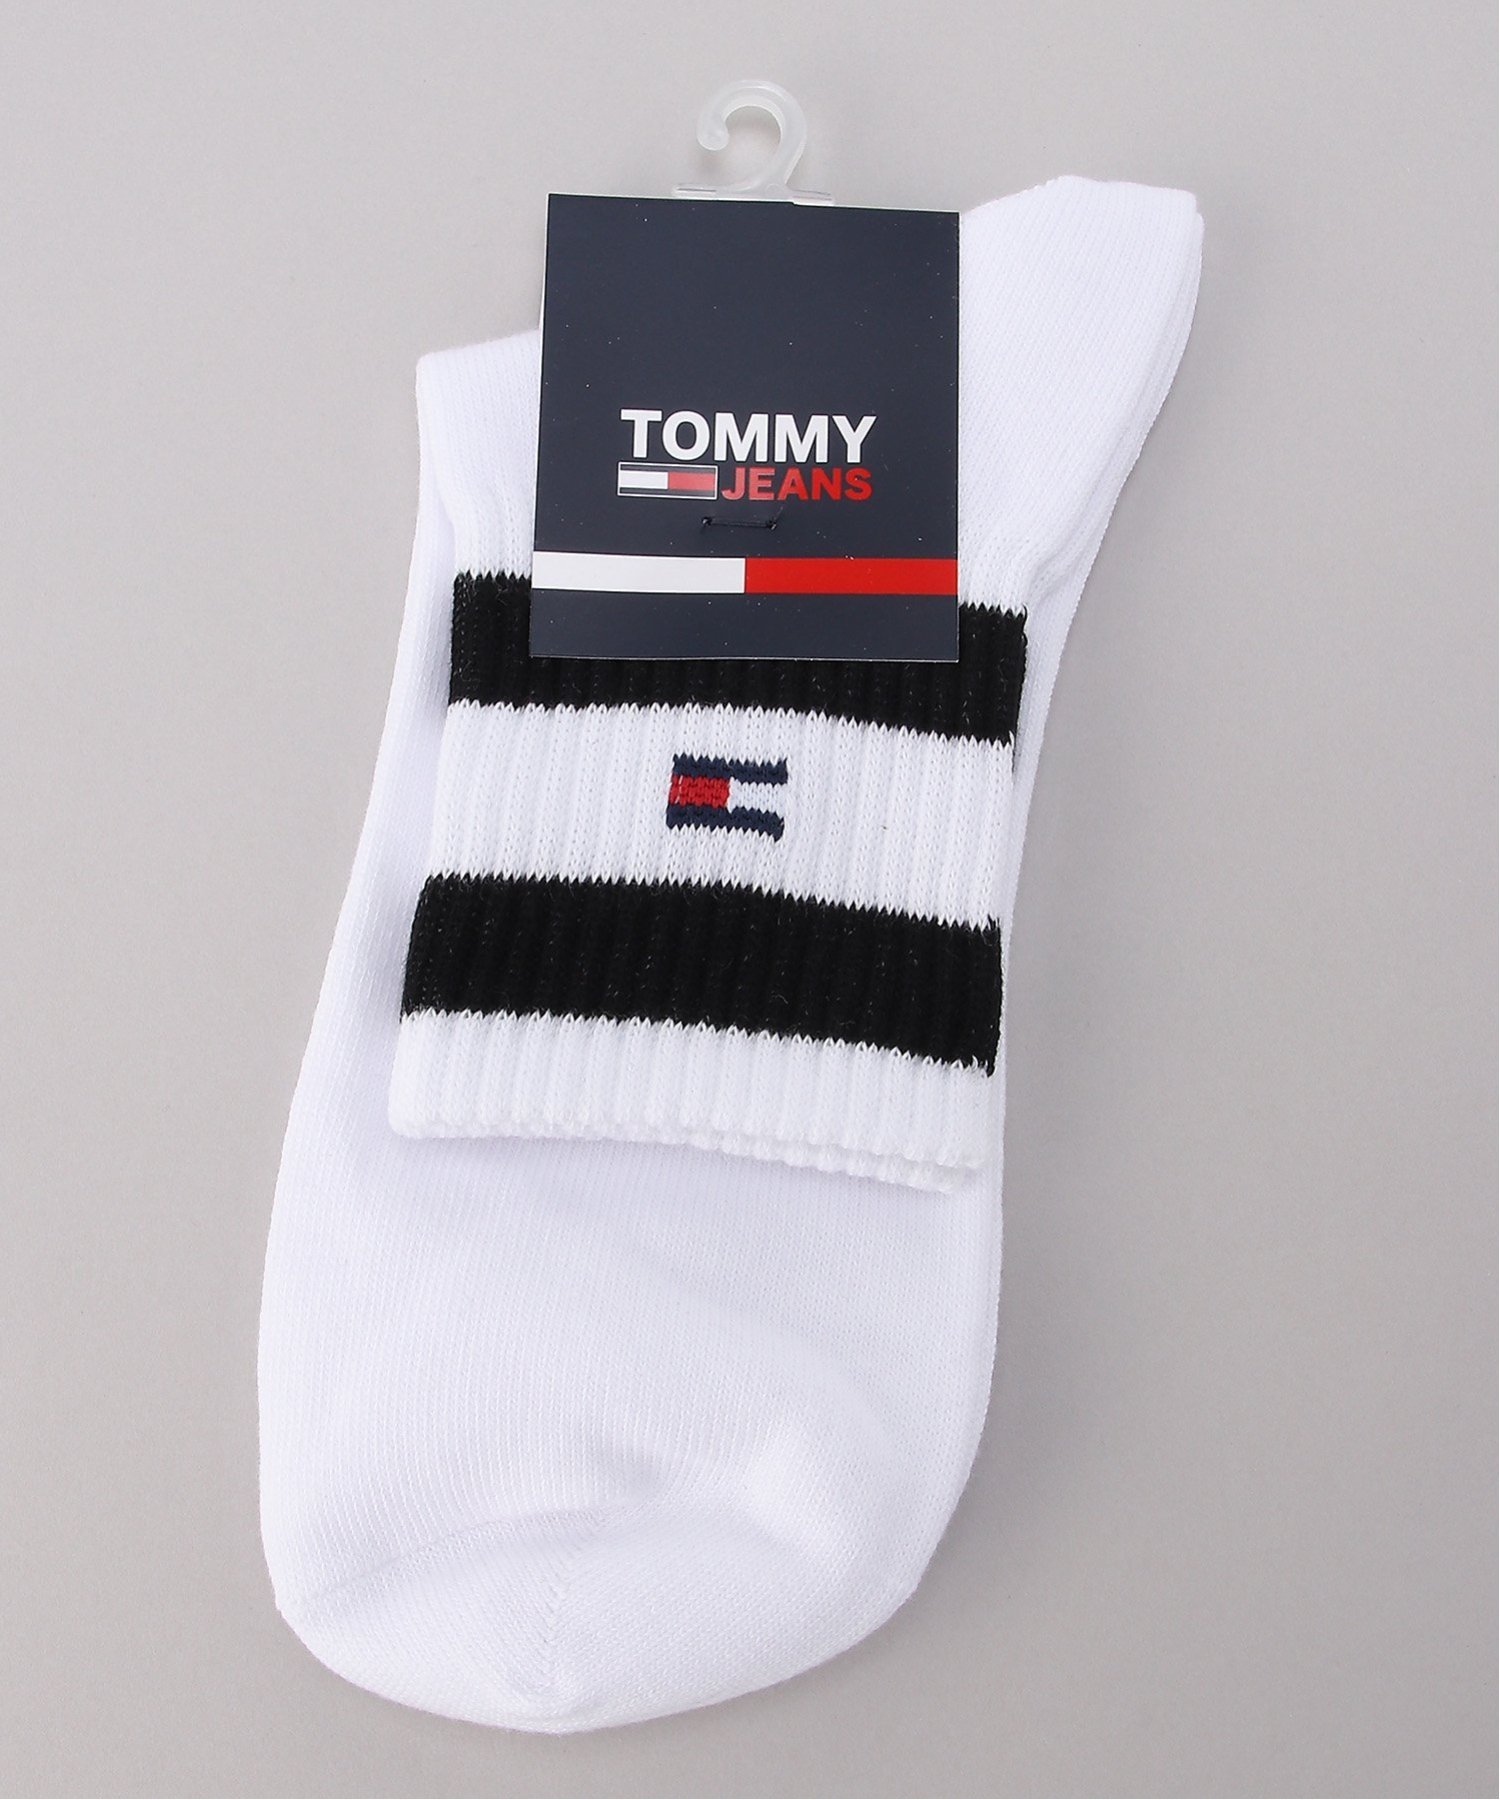 TOMMY JEANS (M)TOMMY HILFIGER(トミーヒルフィガー) TJ COLOR STRIPE SOCKS トミーヒルフィガー 靴下・レッグウェア 靴下 ホワイト